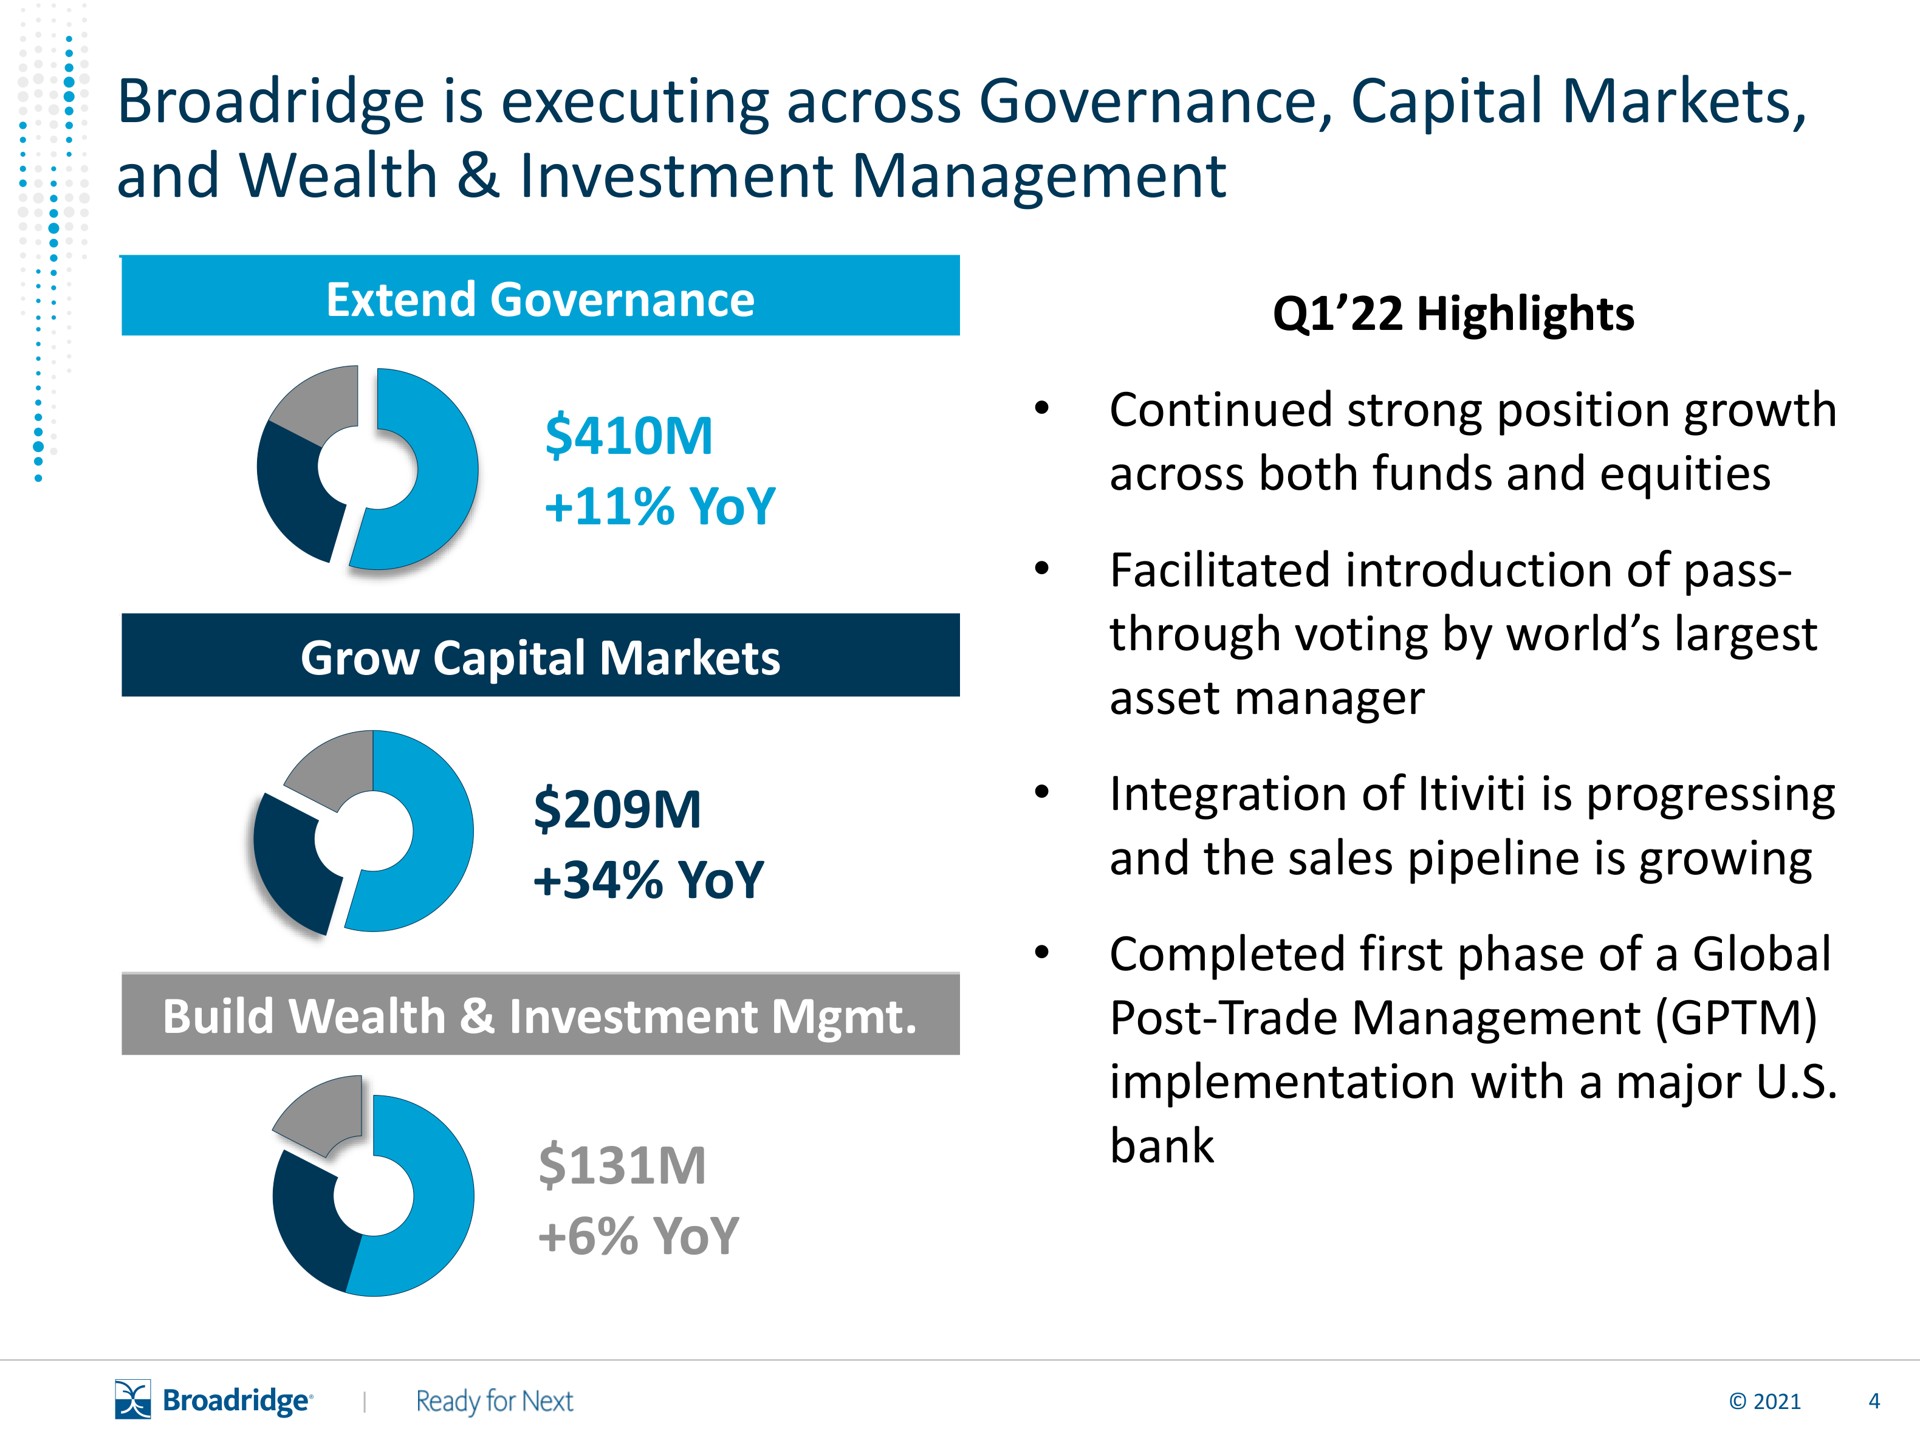 is executing across governance capital markets and wealth investment management extend governance highlights yoy grow capital markets yoy build wealth investment yoy continued strong position growth across both funds and equities facilitated introduction of pass through voting by world asset manager integration of is progressing and the sales pipeline is growing completed first phase of a global post trade management implementation with a major bank | Broadridge Financial Solutions